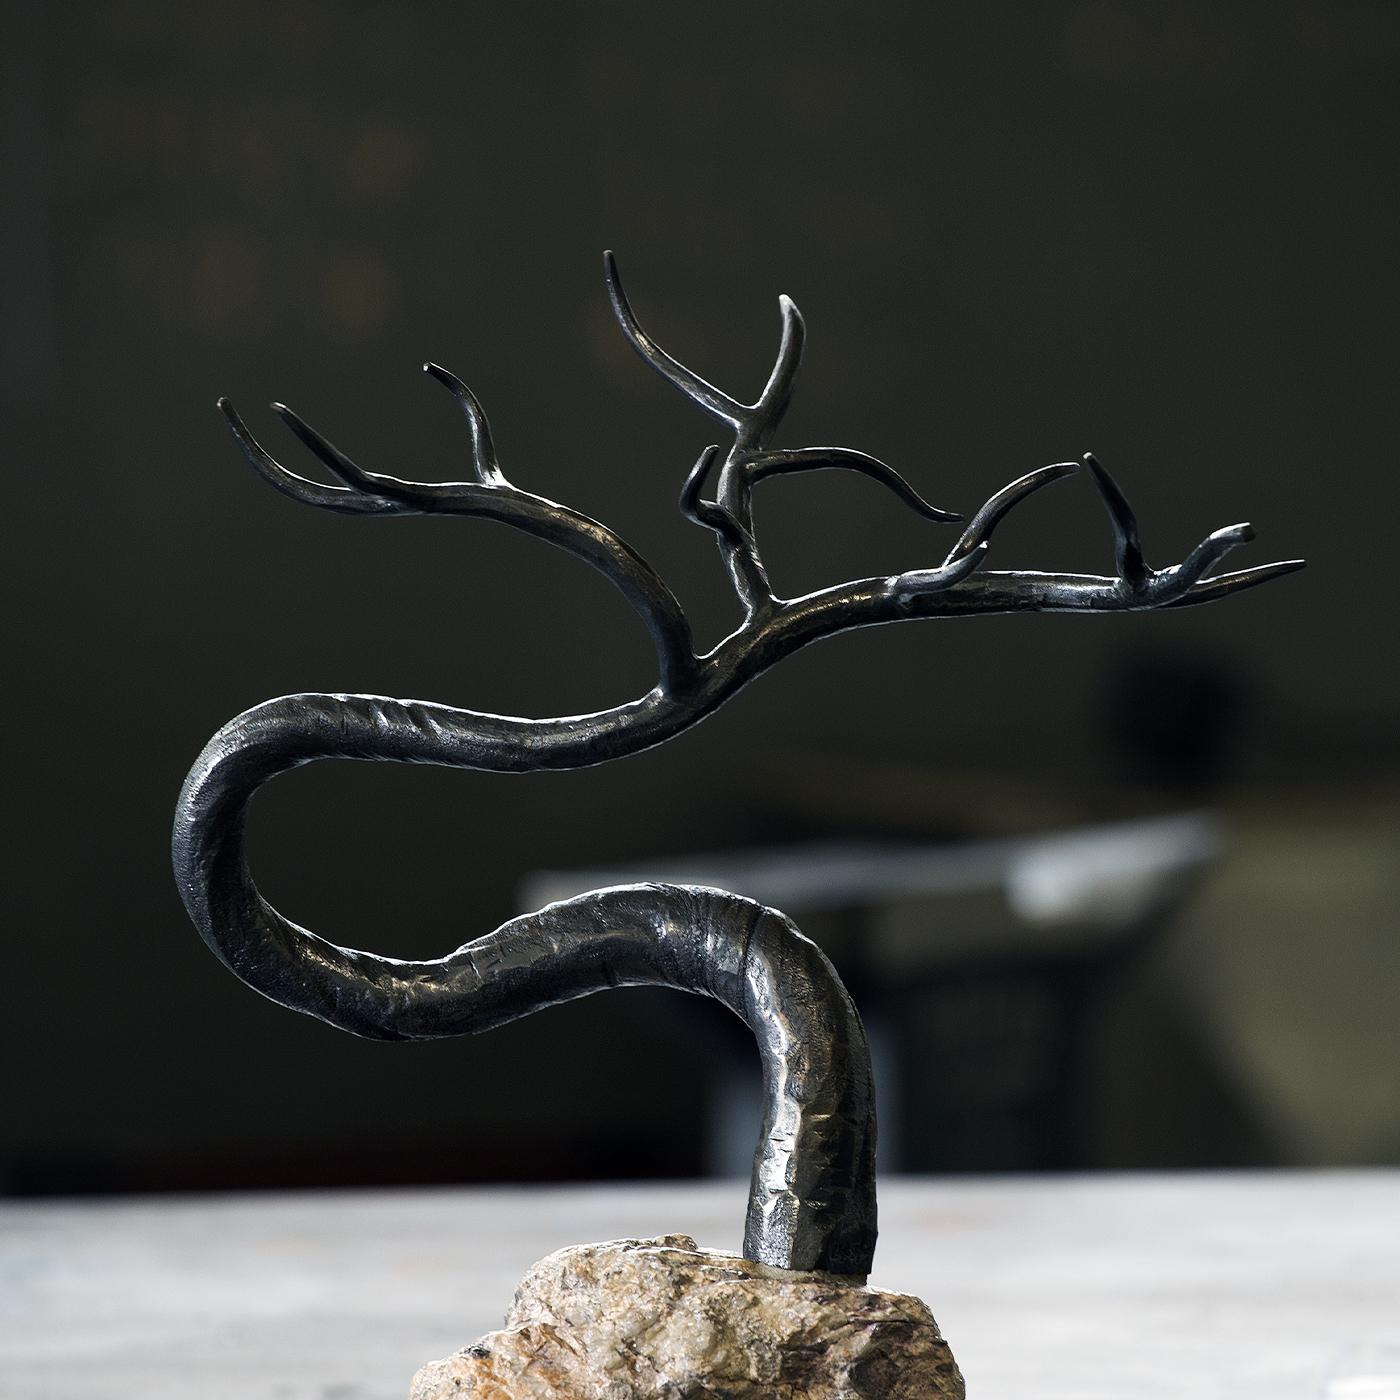 This spectacular iron bonsai is symbolic of winter (